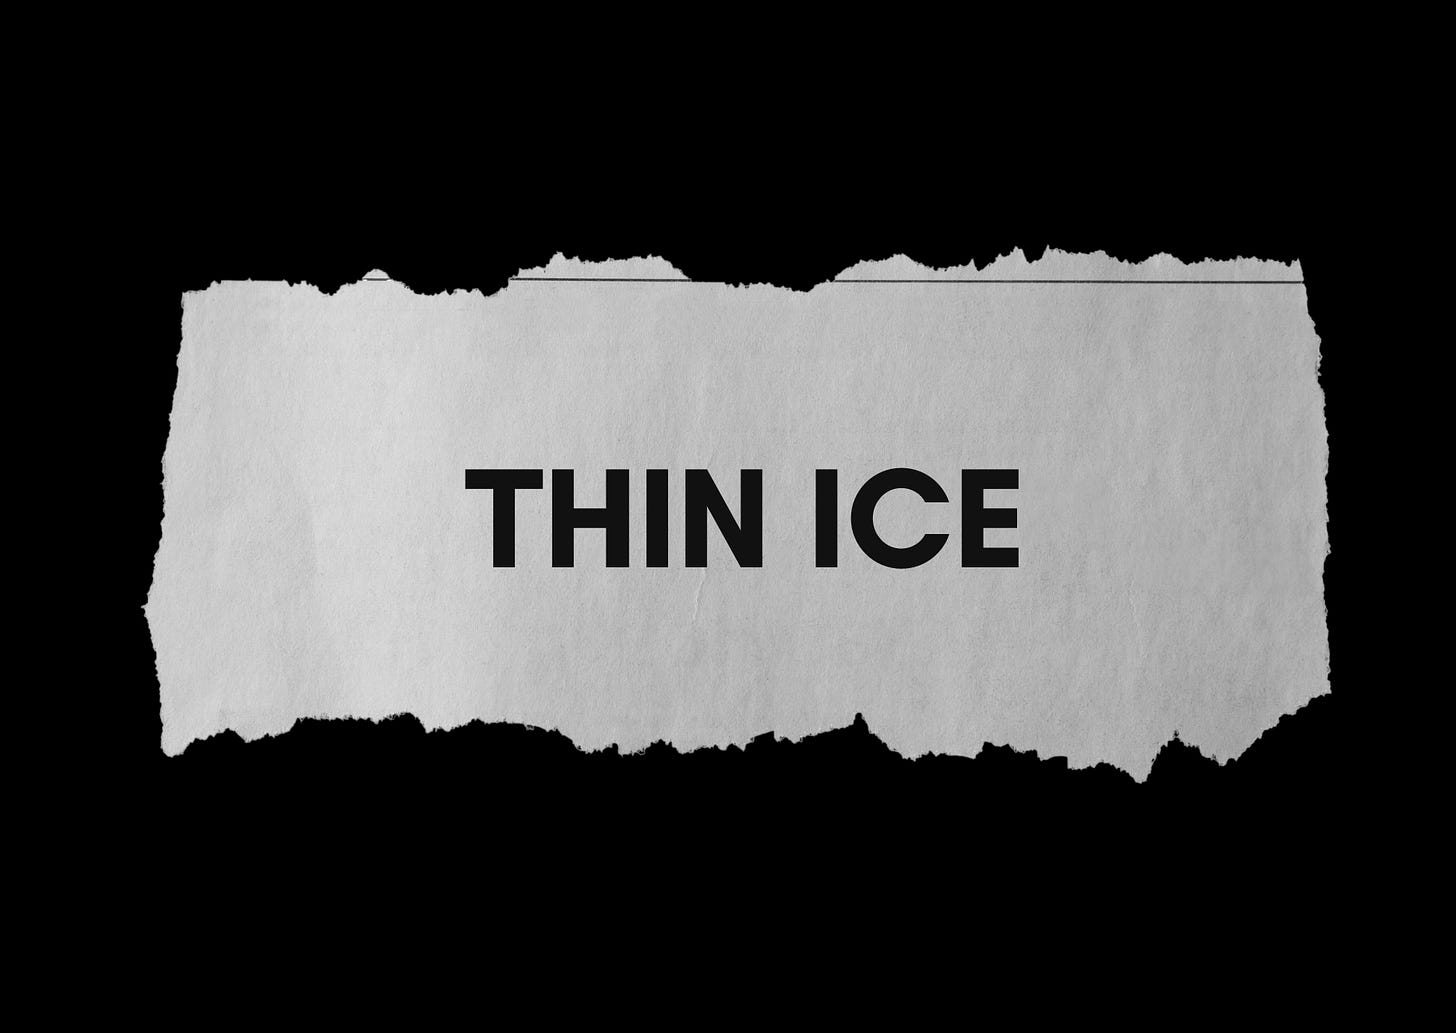 Ripped newspaper on which the words "THIN ICE" are printed